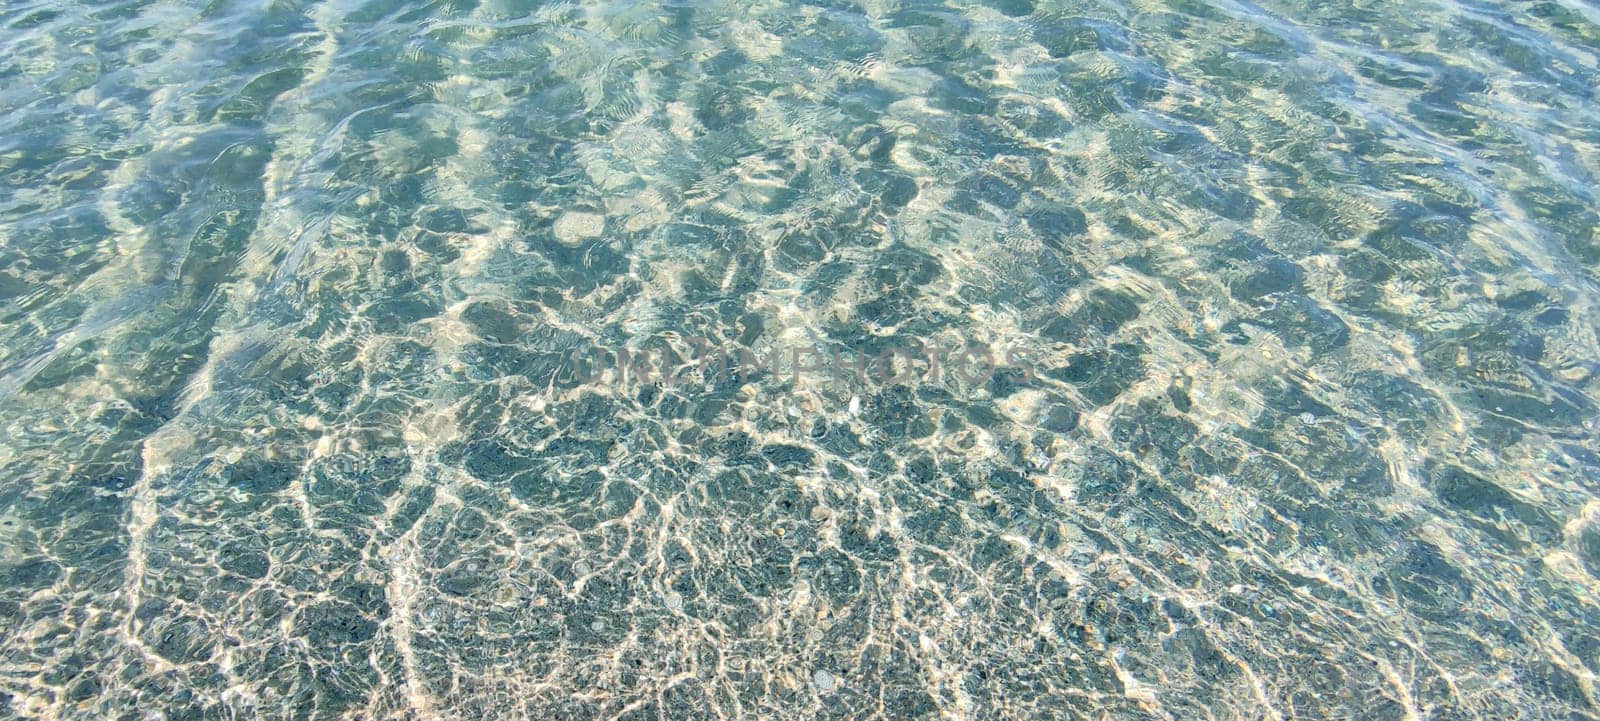 blue transparent water surface in which sunlight is reflected.